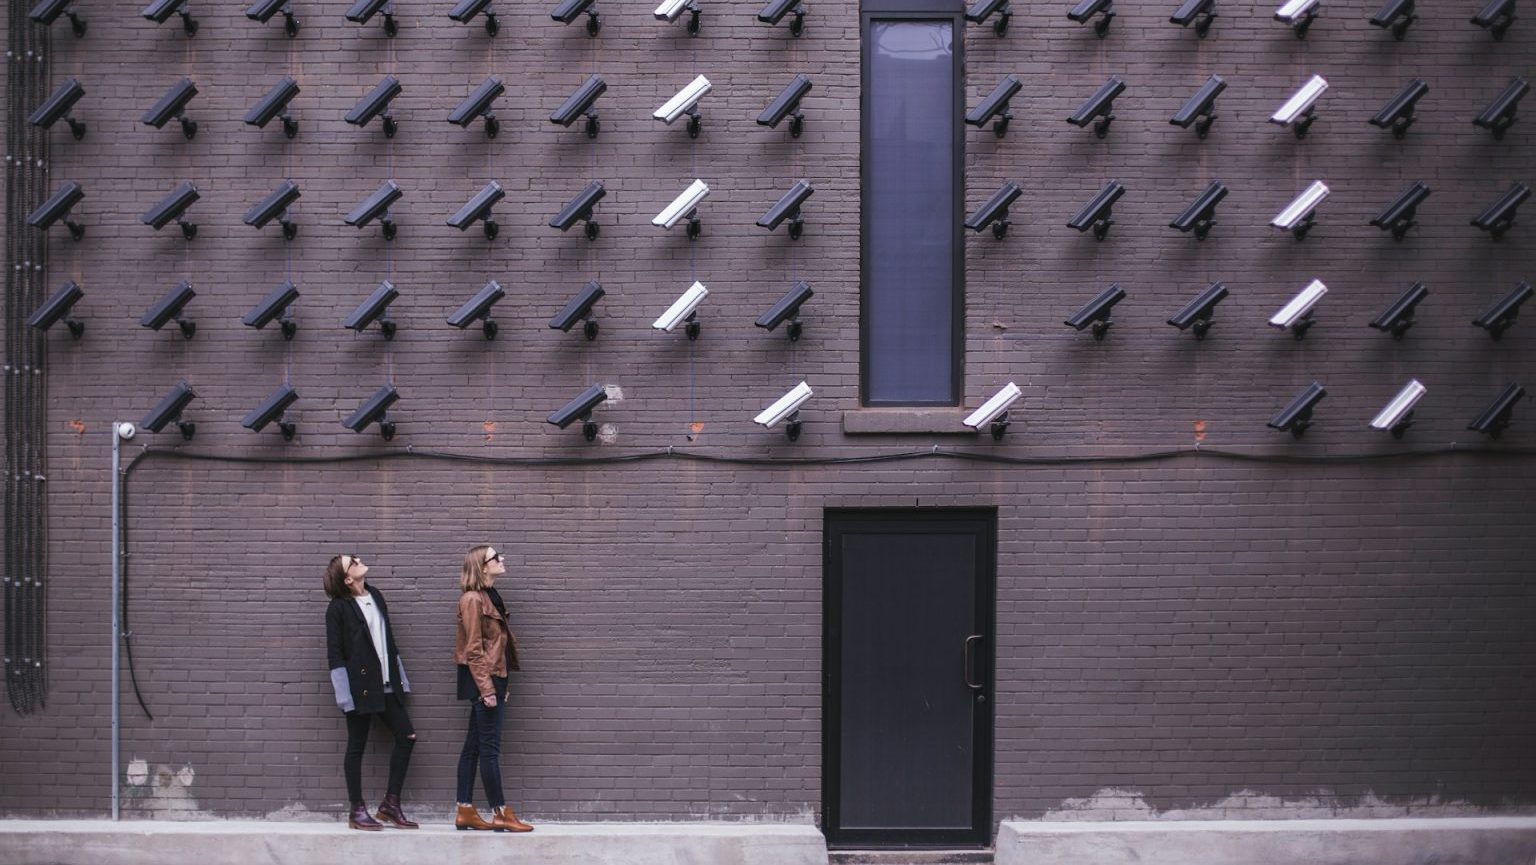 Two people walking past a dark brick wall with numerous security cameras pointing in various directions.